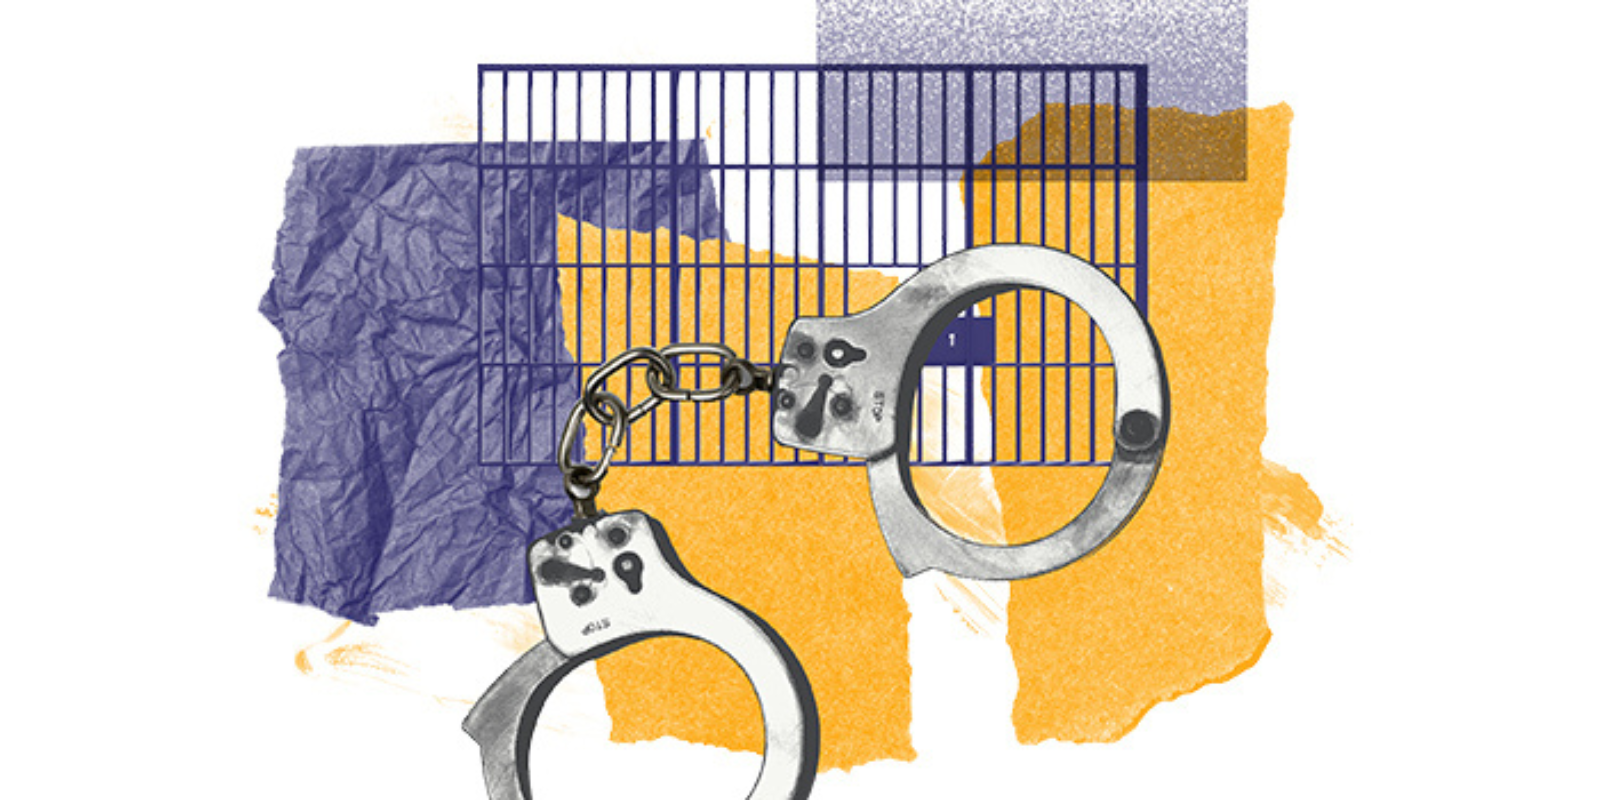 Graphic with prison cells and handcuffs to symbolize our prison system